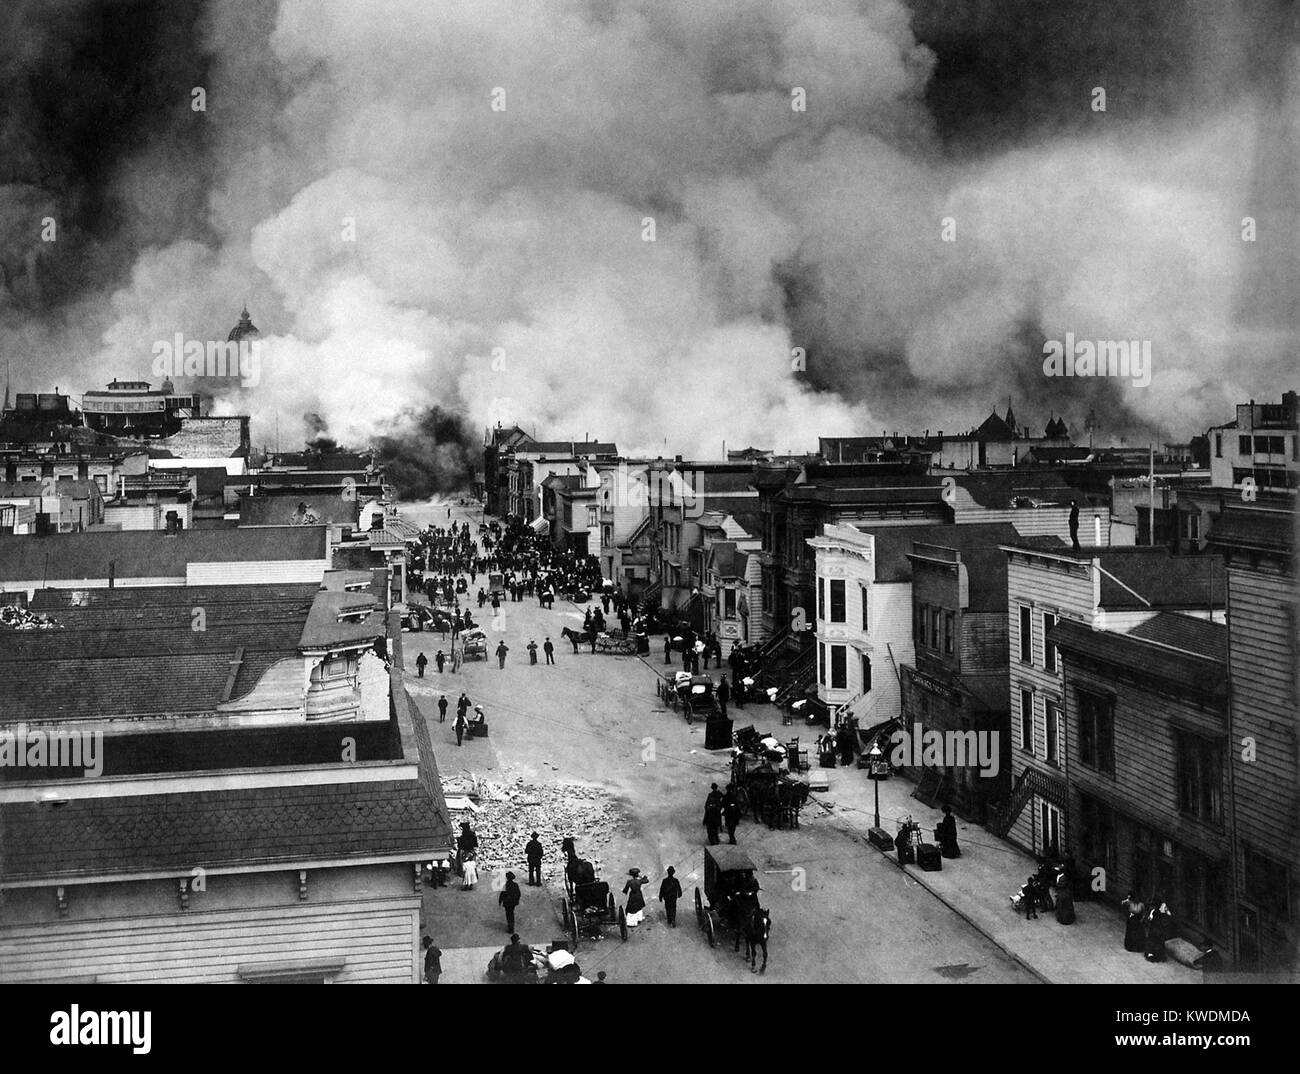 San Francisco burning after April 18, 1906 earthquake, with view of smoke over the Mission District. Within three days, fires, caused by ruptured gas mains, destroyed approximately 25,000 buildings over 490 city blocks (BSLOC 2017 17 16) Stock Photo